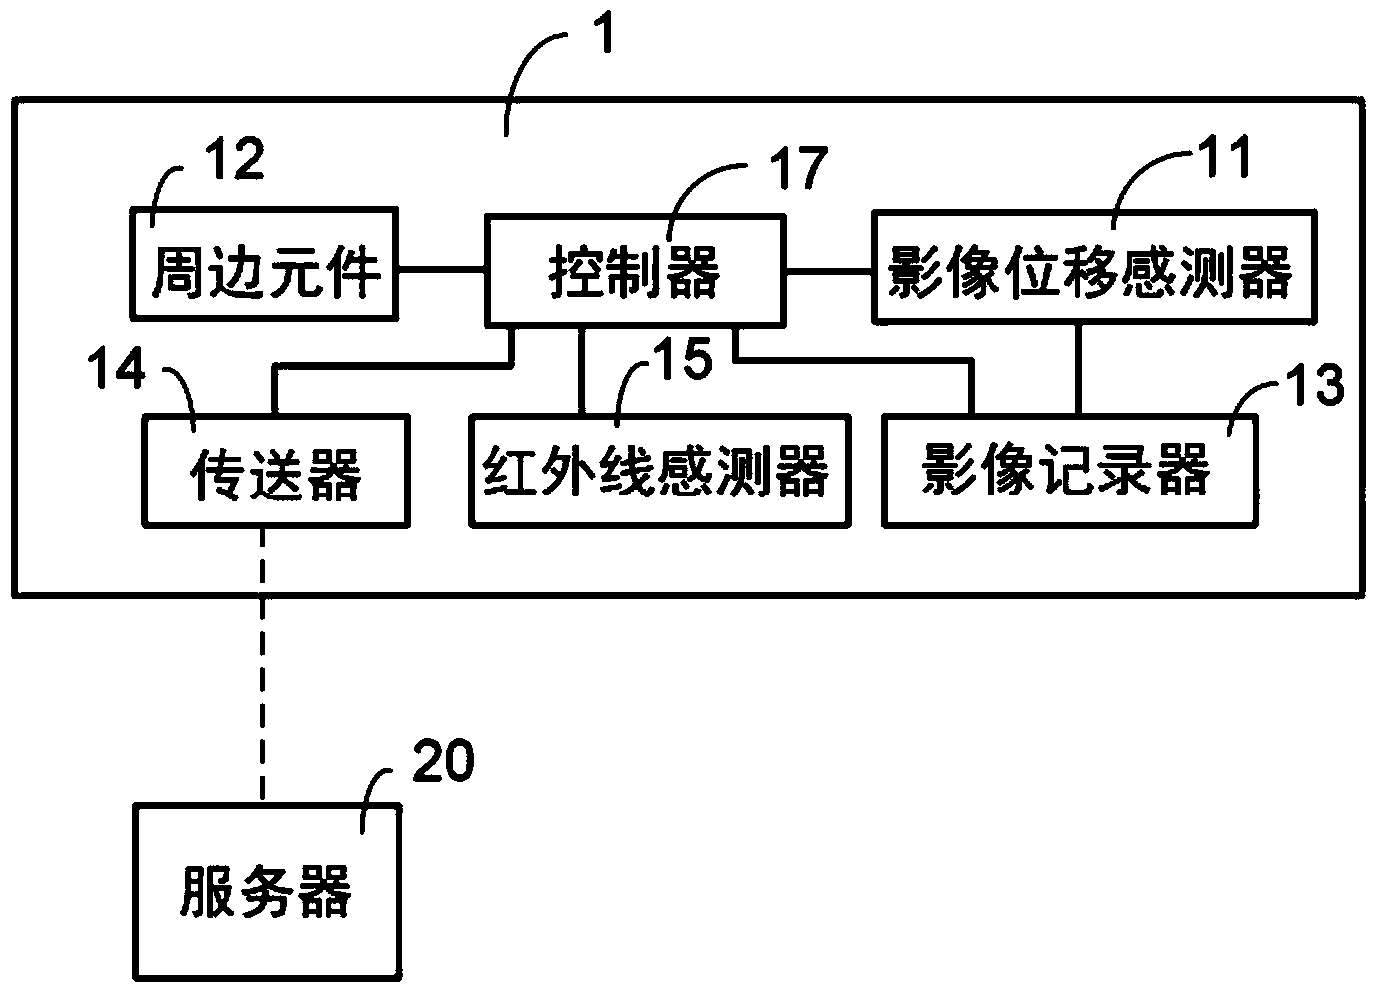 Monitoring device and monitoring method related to monitoring device